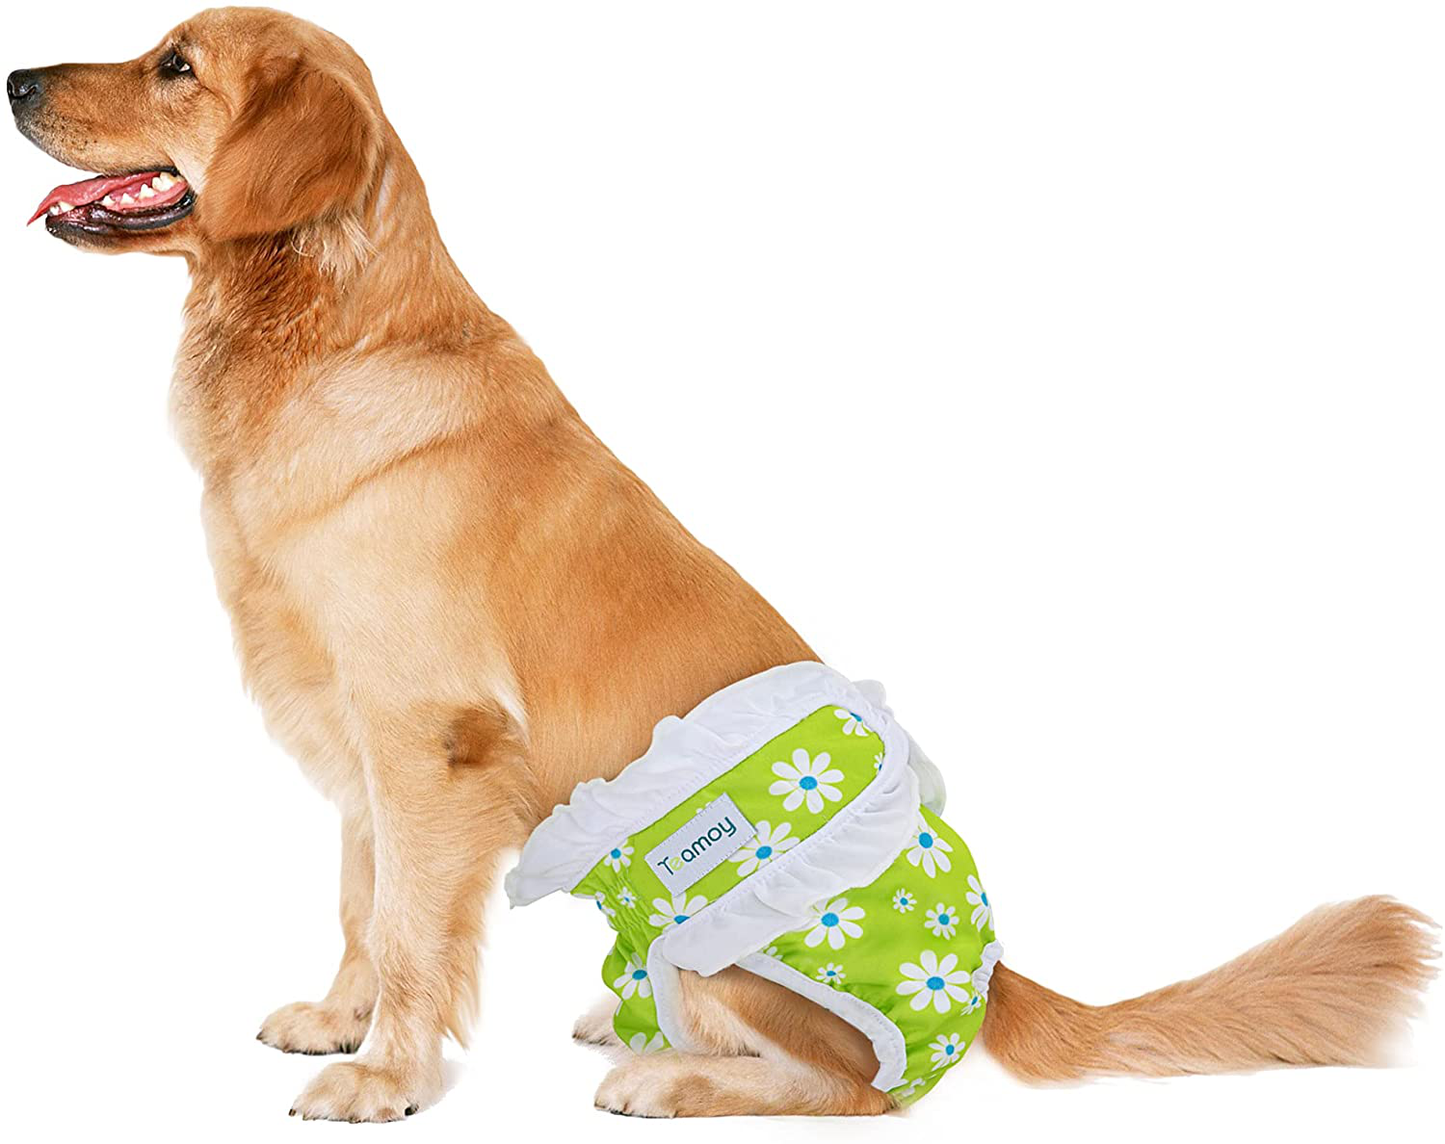 Teamoy Washable Female Dog Diapers(Pack of 4), Reusable Dog Incontinence Panties for Girl Dog in Period Heat